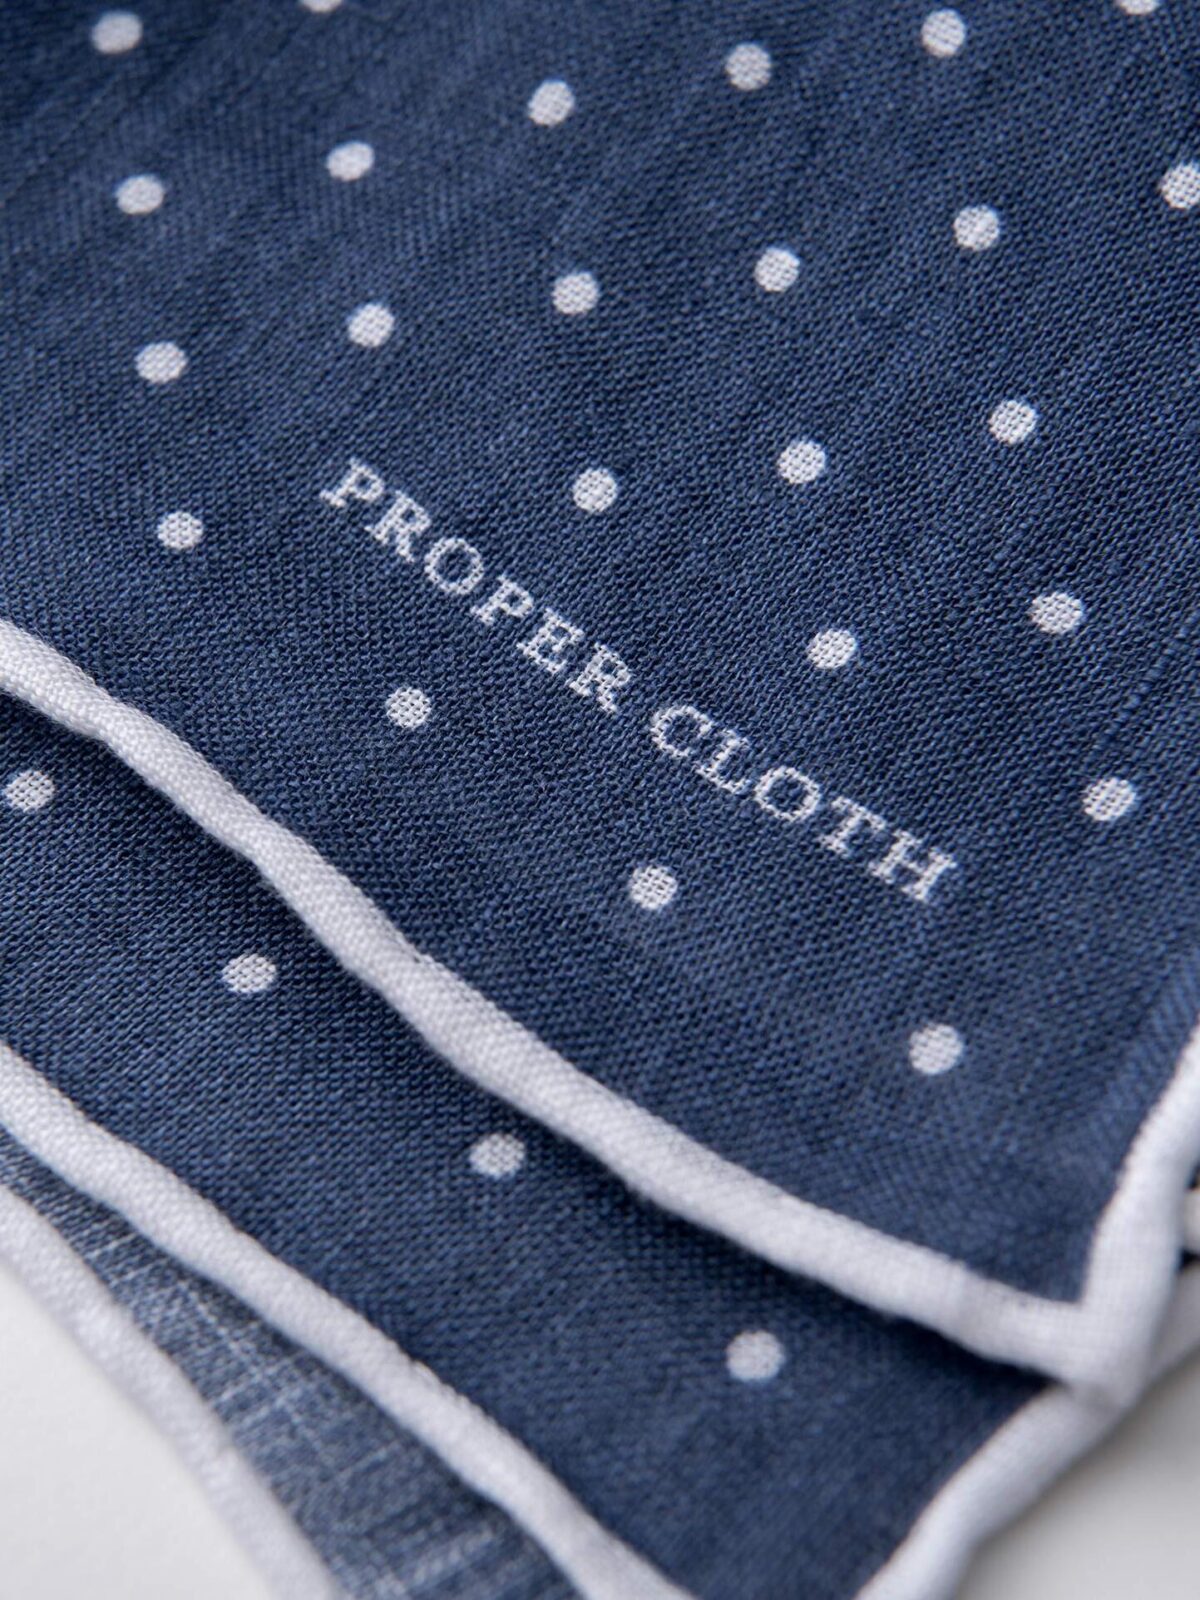 Faded Navy and White Dot Print Linen Pocket Square